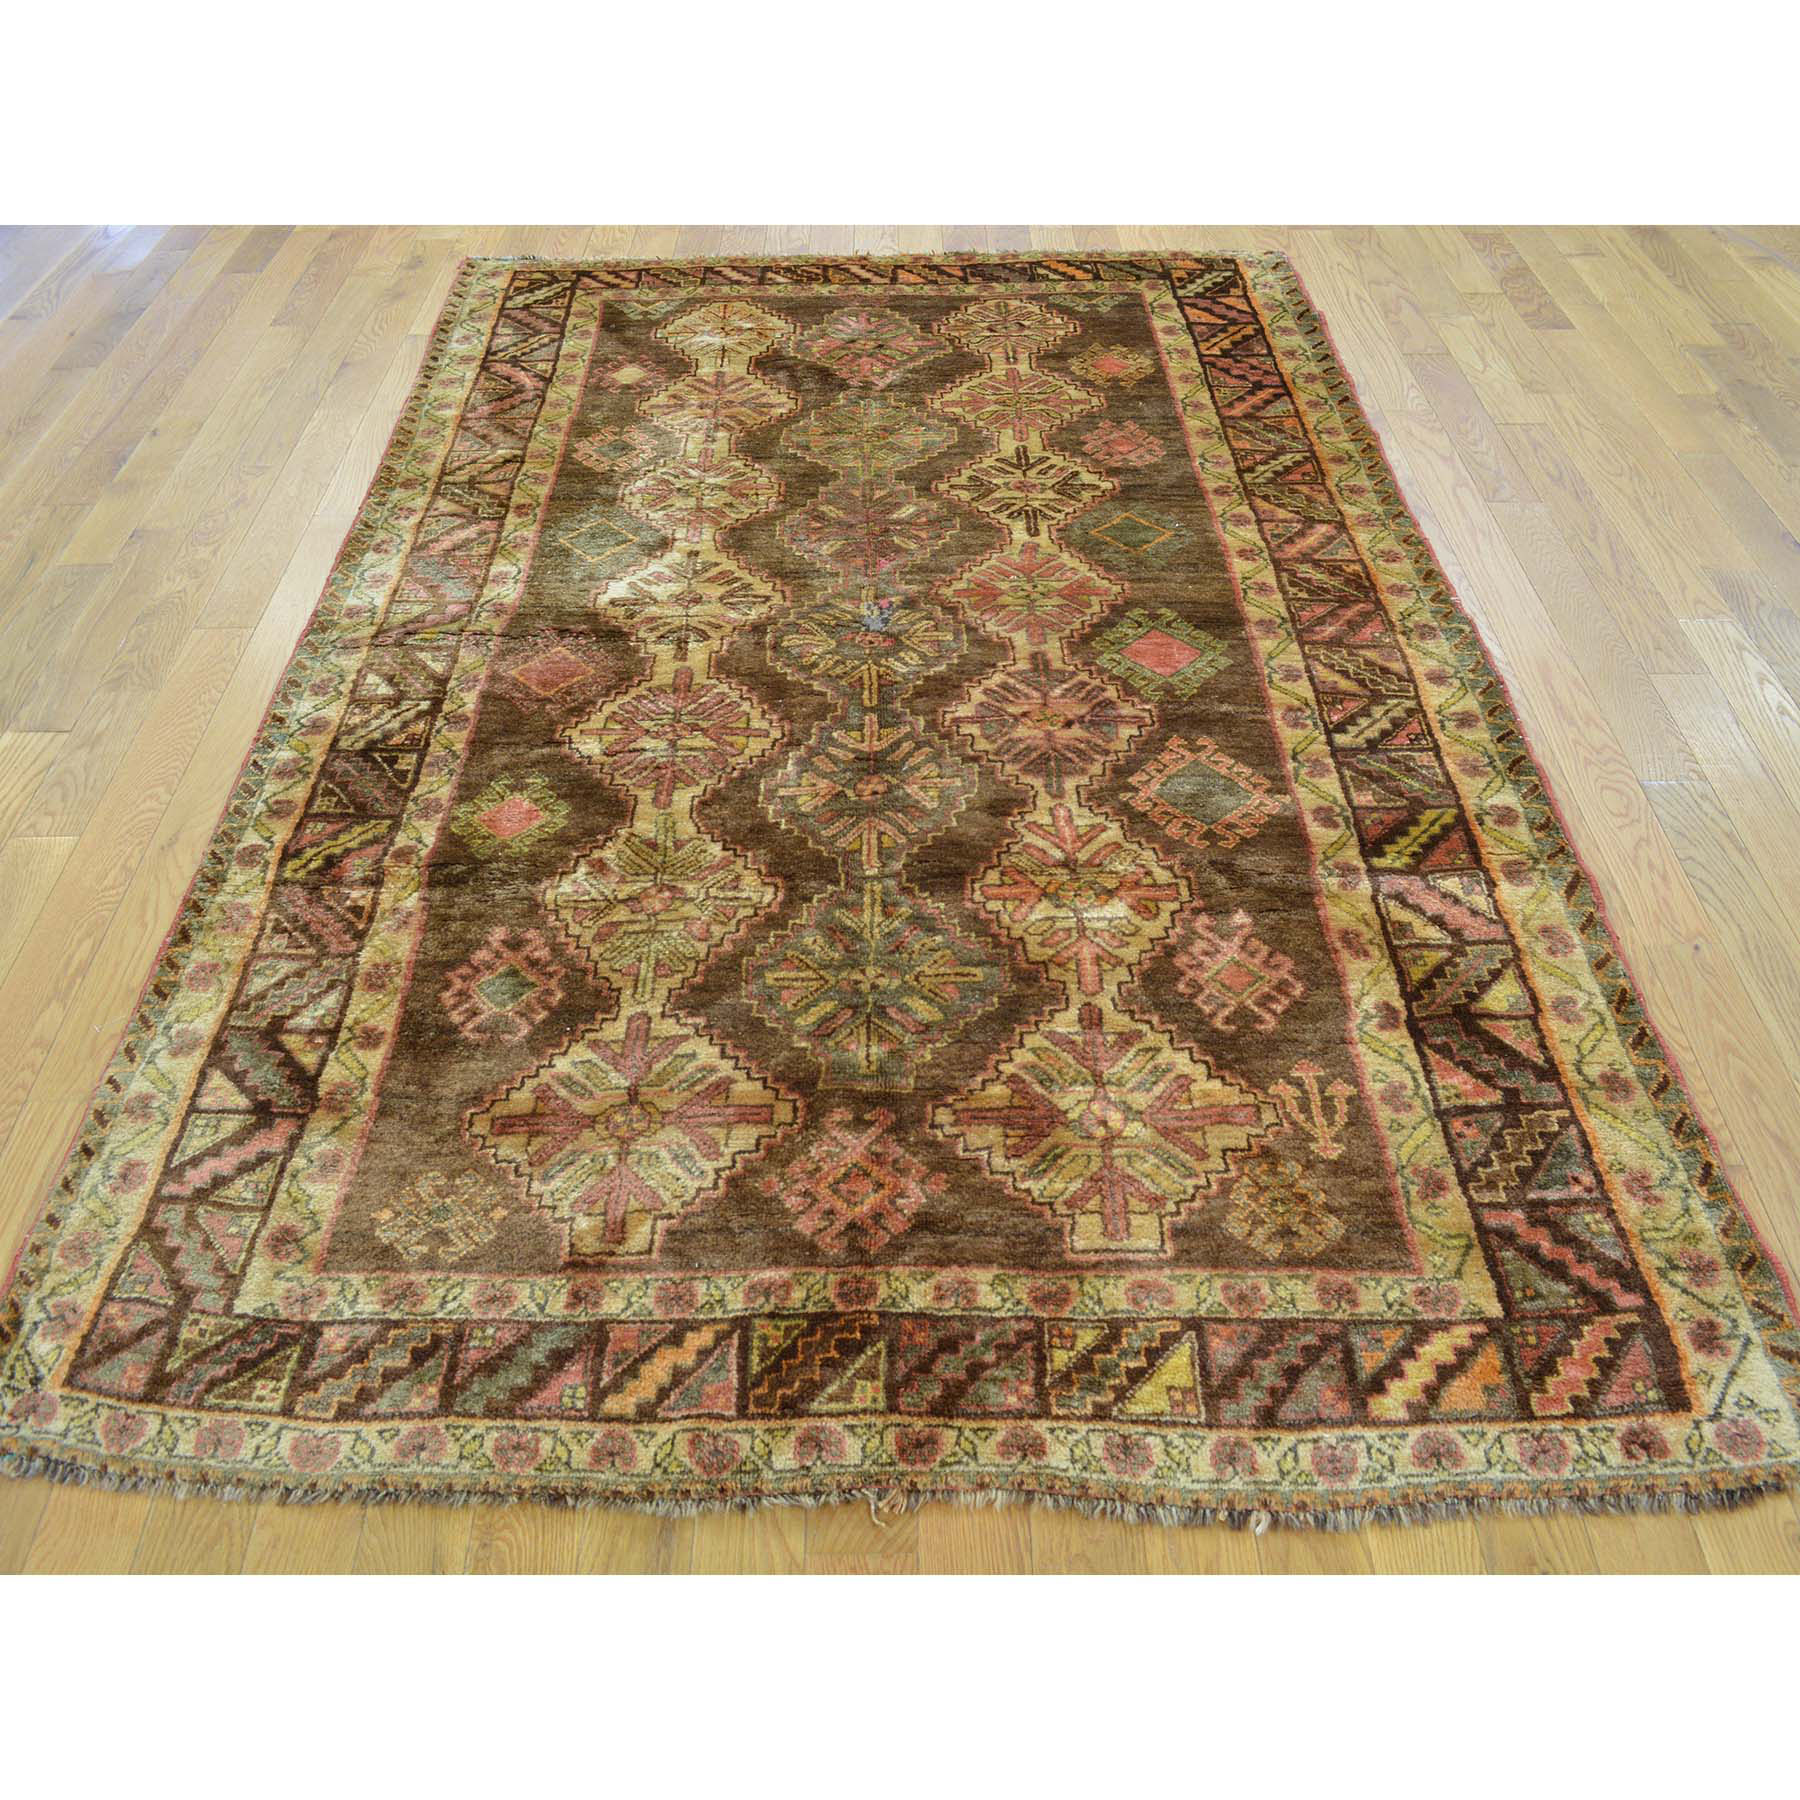 5-x7-9  Semi Antique Persian Shiraz Exc Cond Hand Knotted Rug 